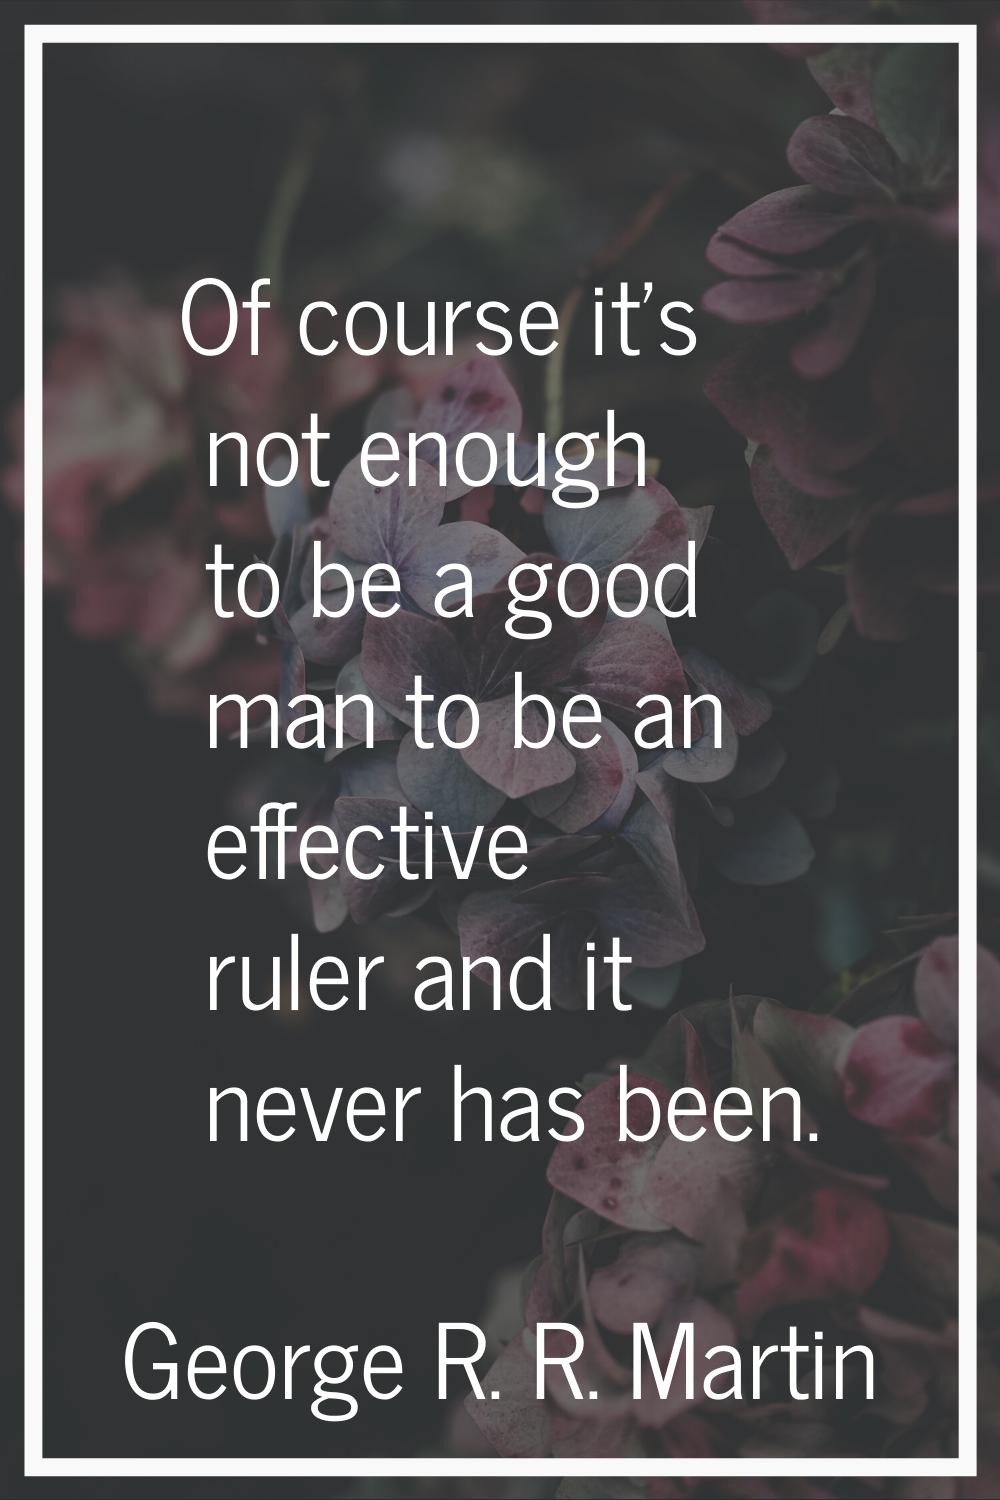 Of course it's not enough to be a good man to be an effective ruler and it never has been.